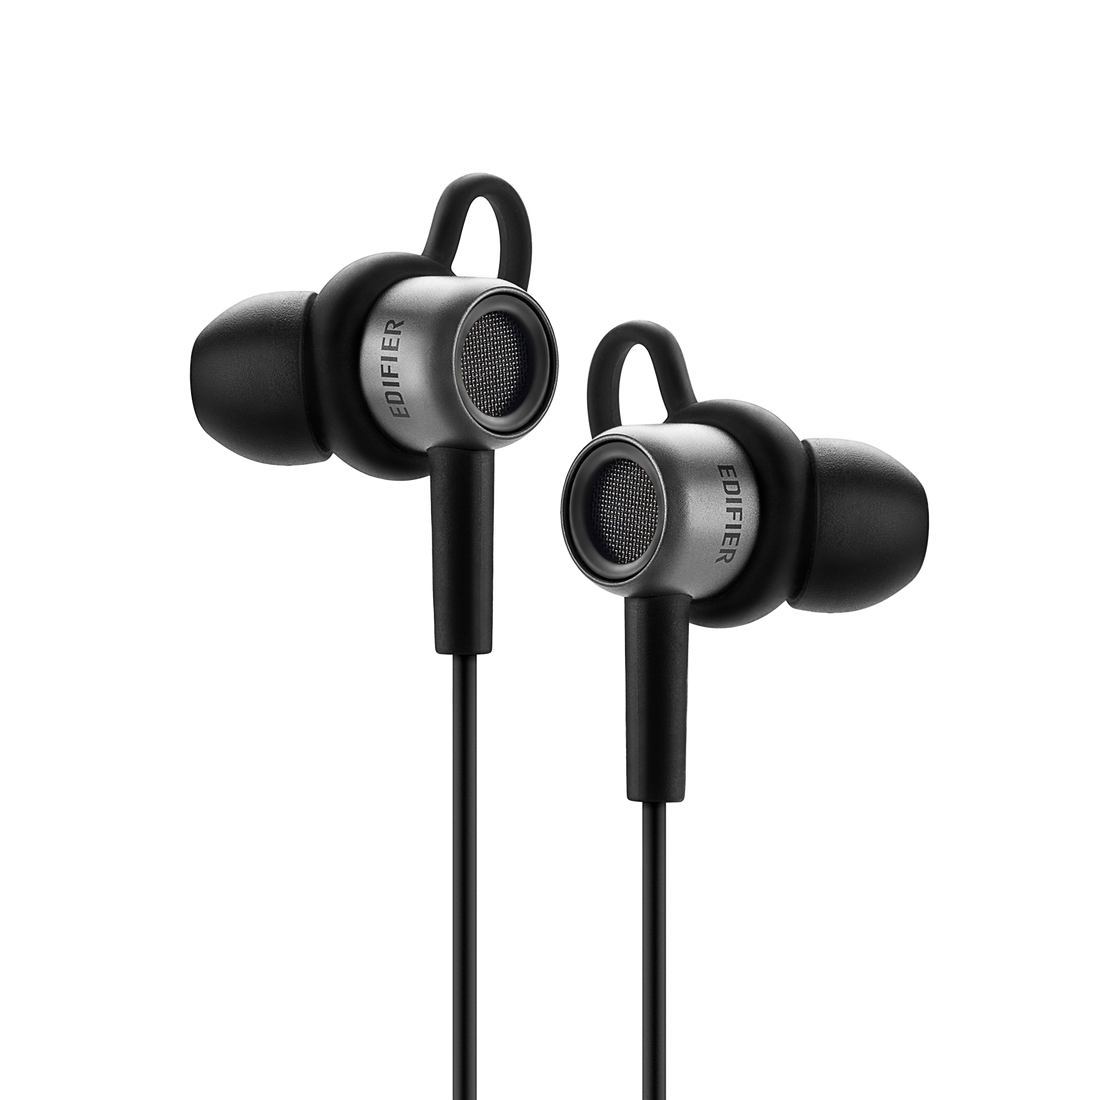 P295 Wired Earphones with Mic and In-line Controls